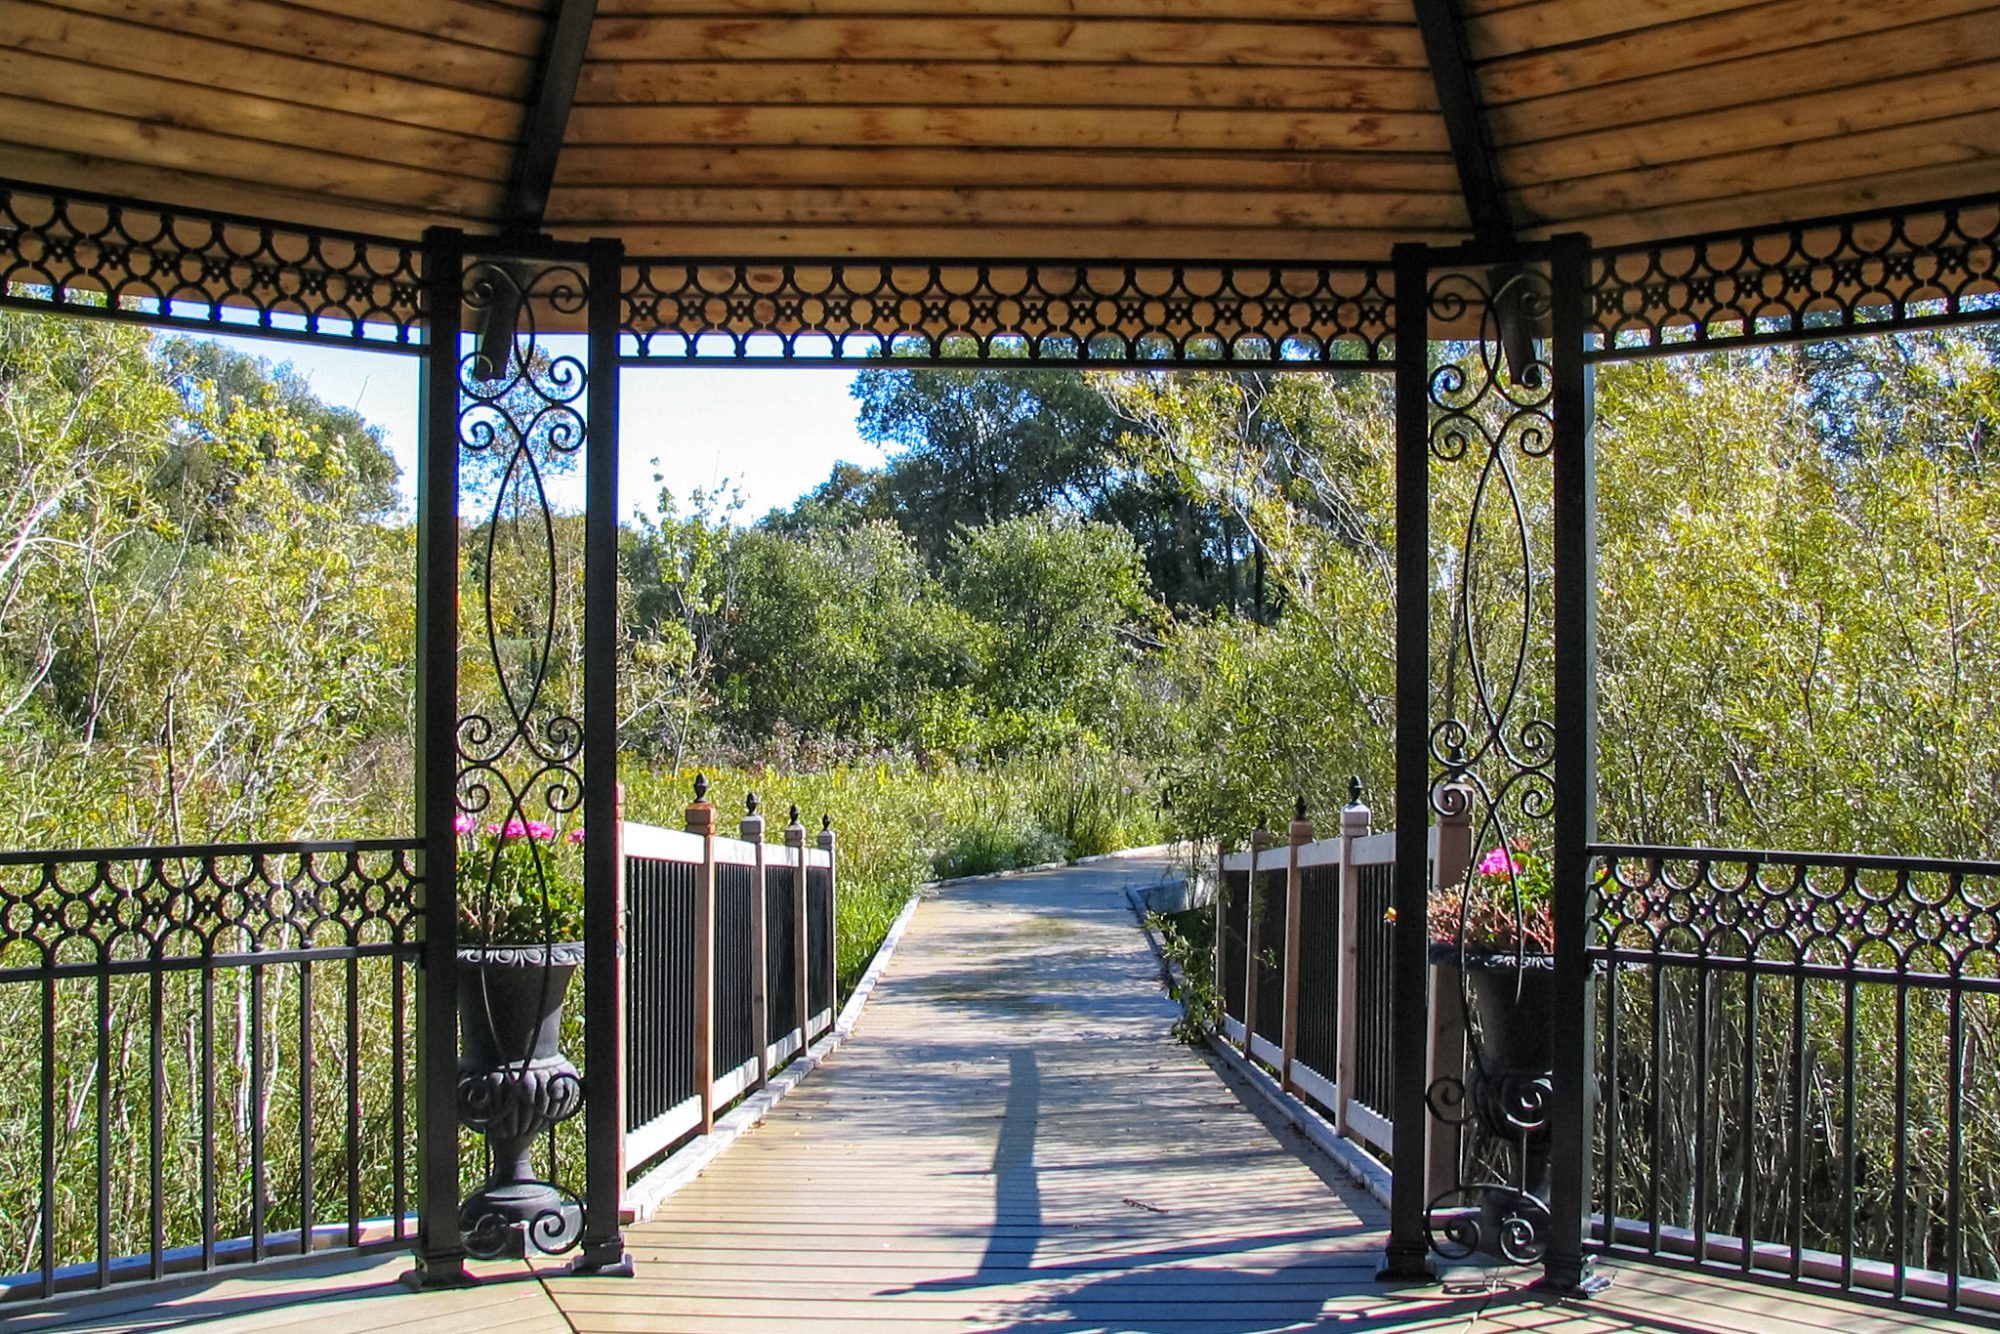 View from inside a gazebo with wooded roof, metal details, and wooden boardwalk